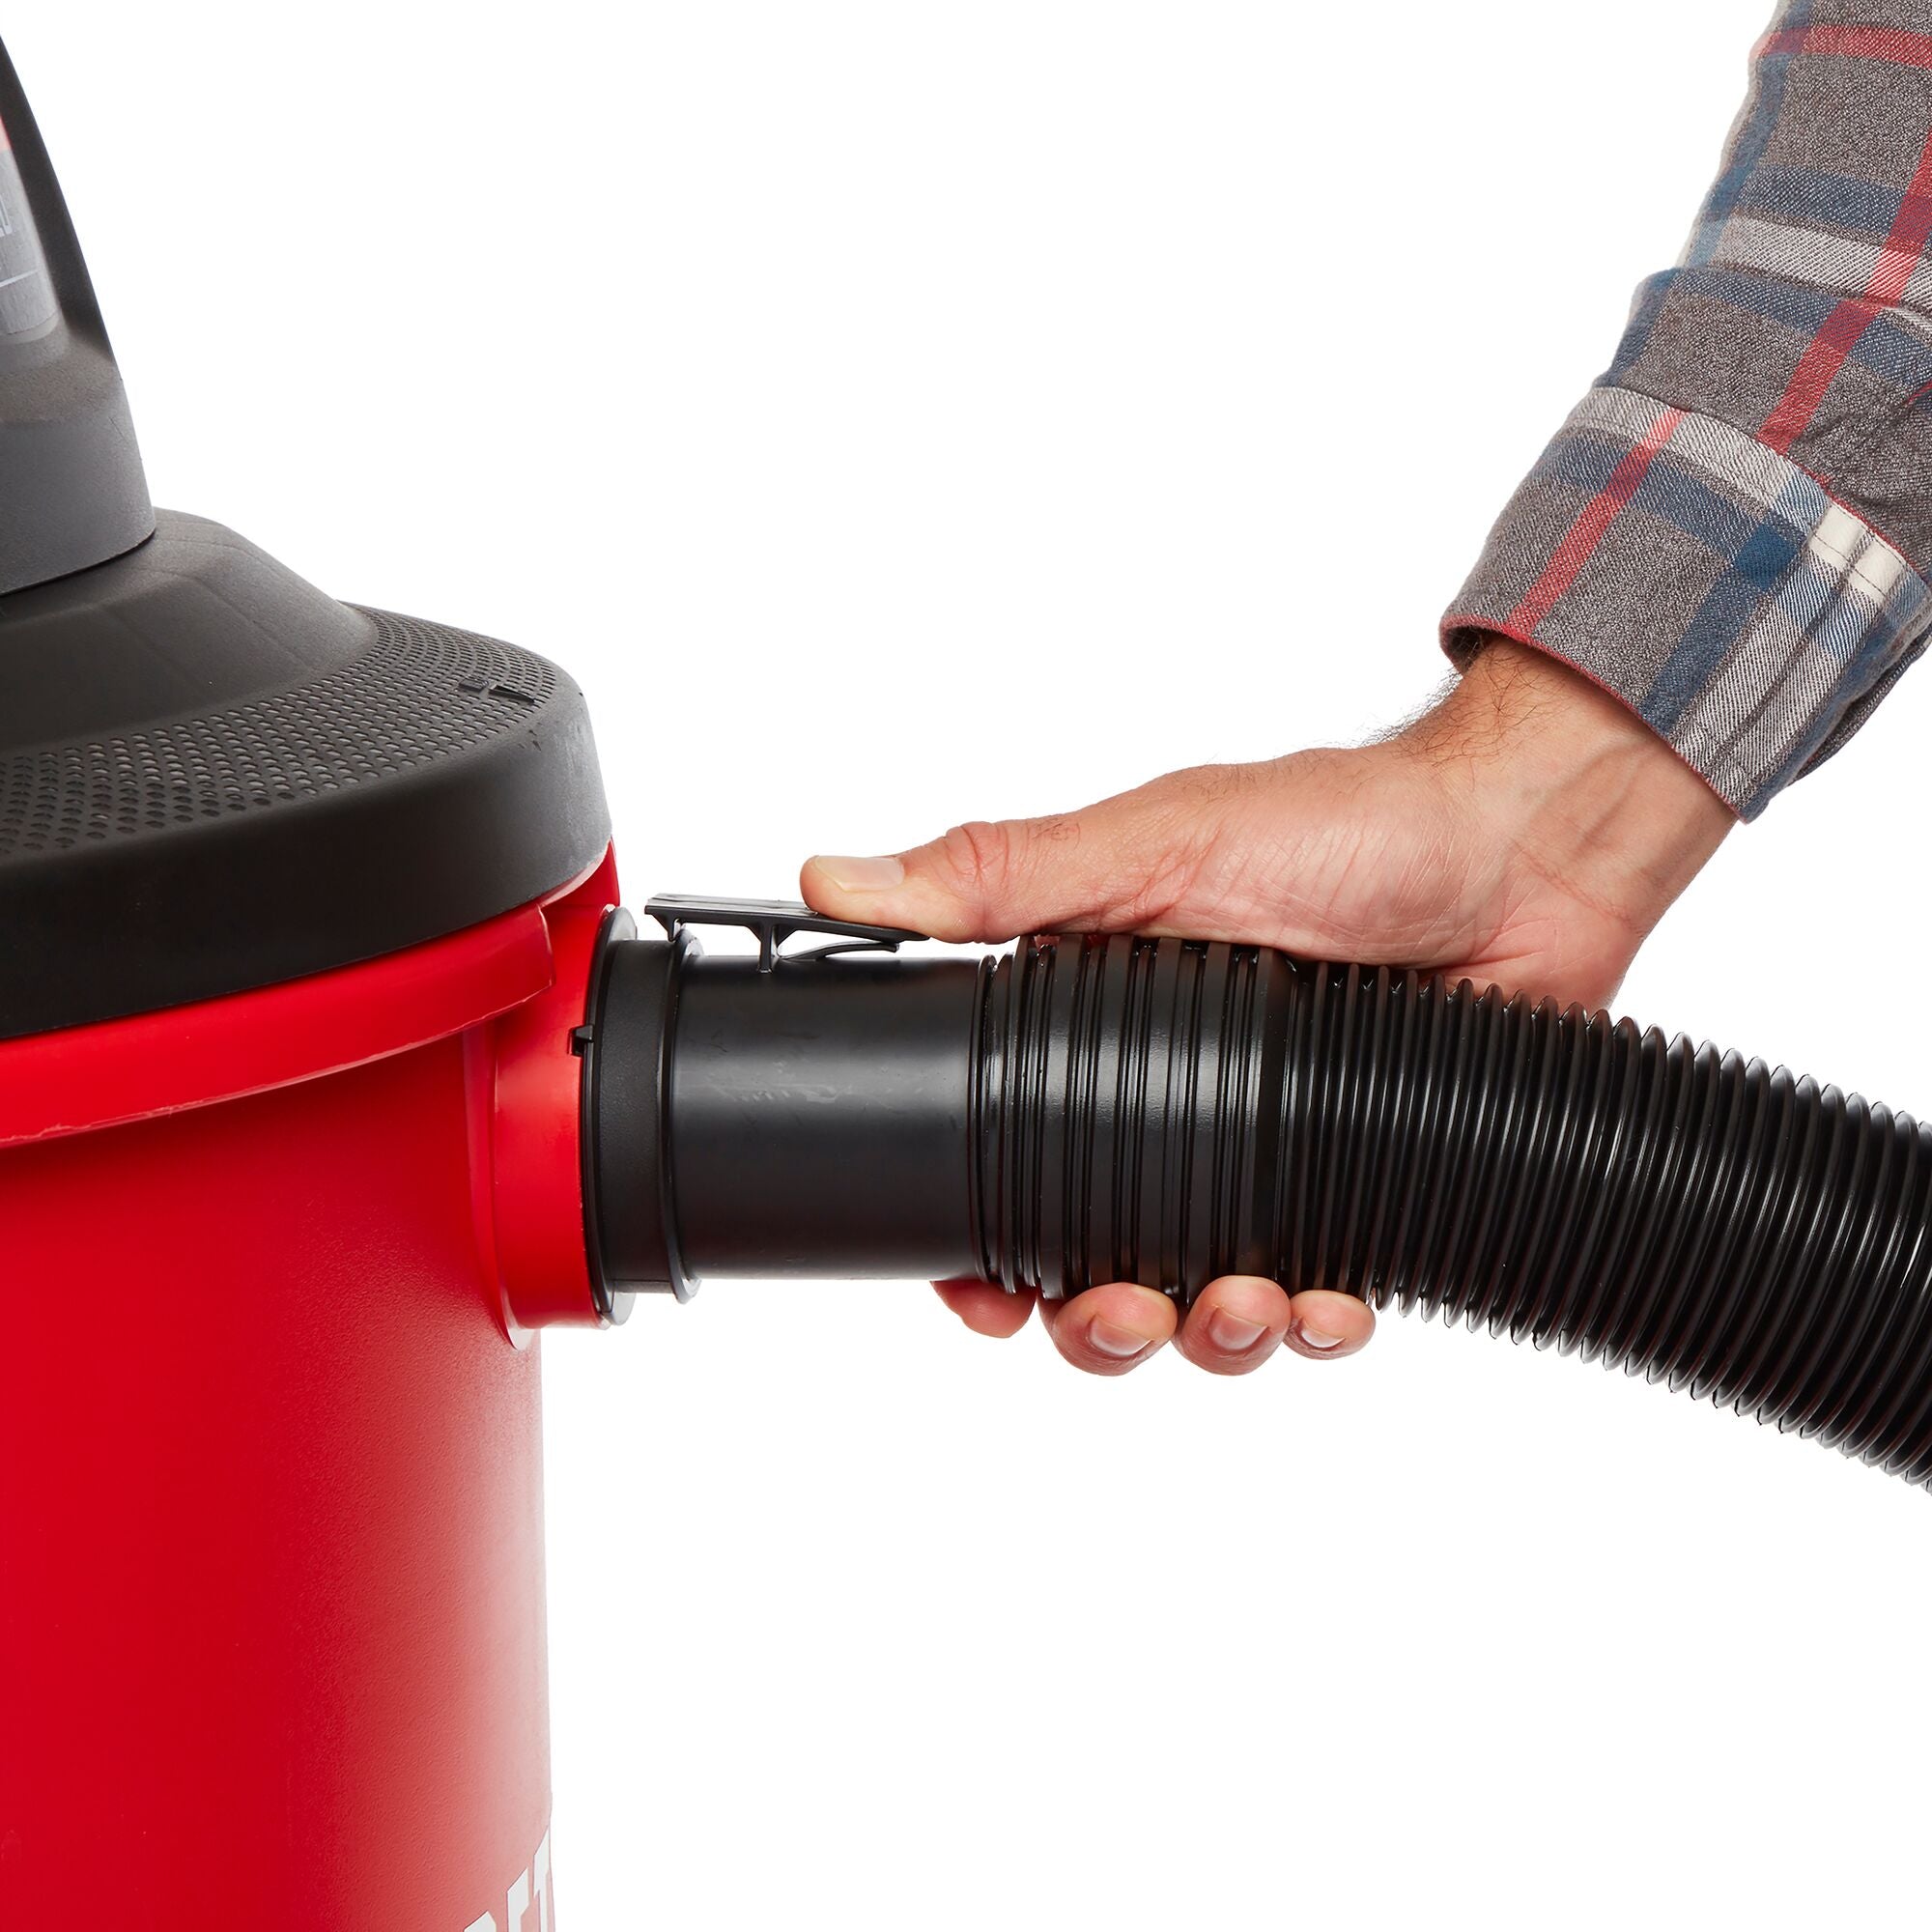 Side view of person locking shop vacuum hose onto inlet within the wet/dry shop vac drum